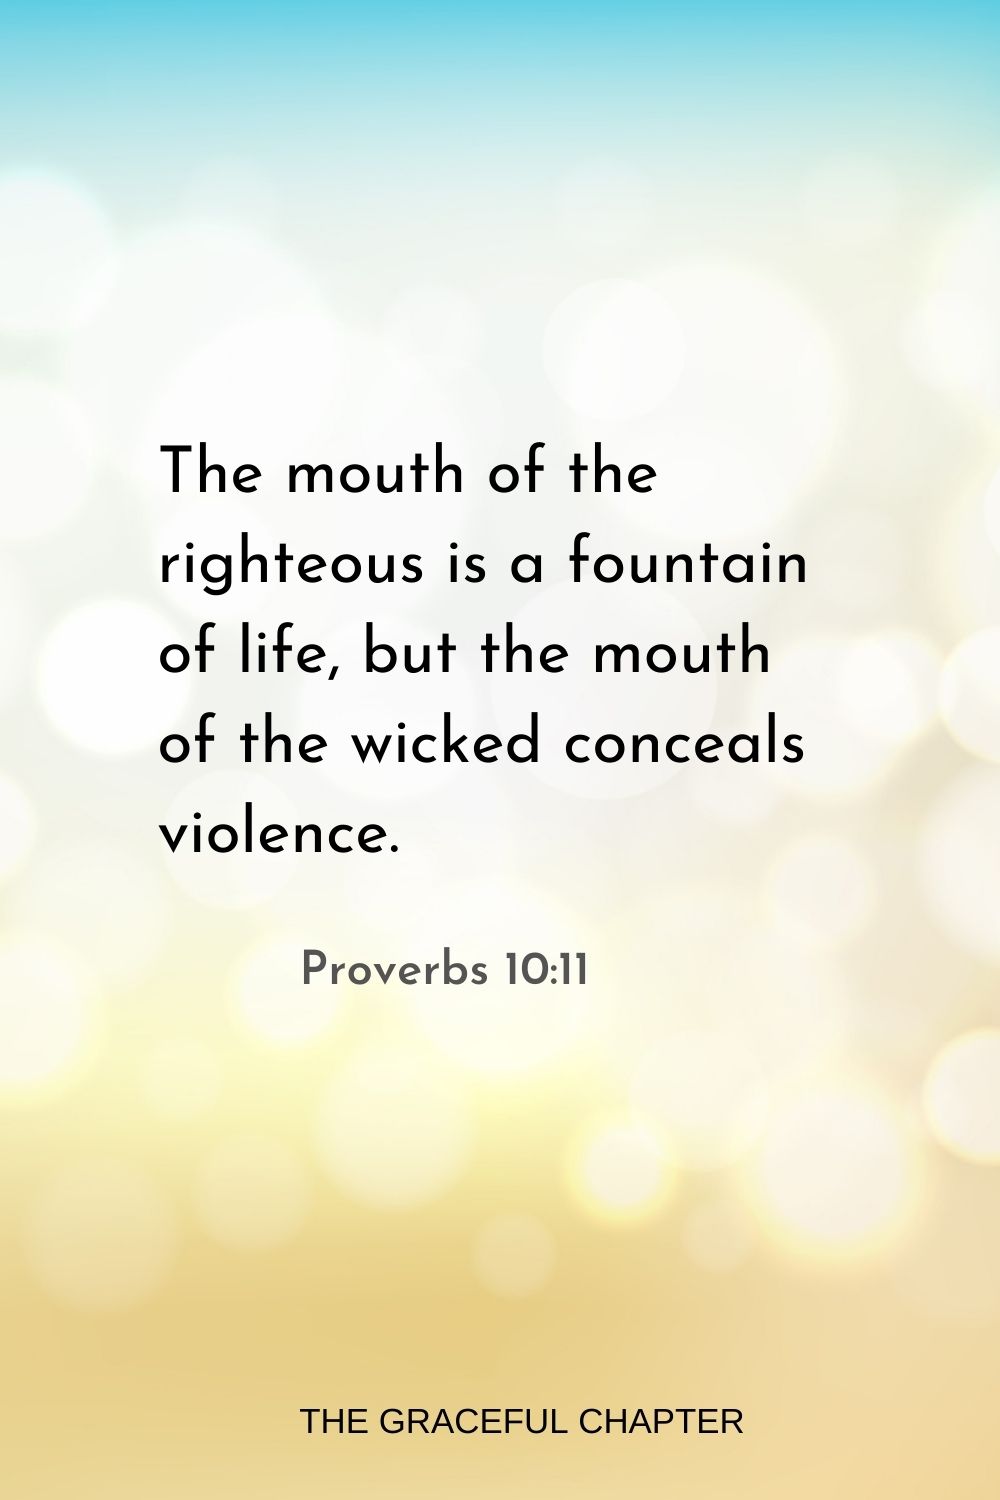 The mouth of the righteous is a fountain of life, but the mouth of the wicked conceals violence. Proverbs 10:11